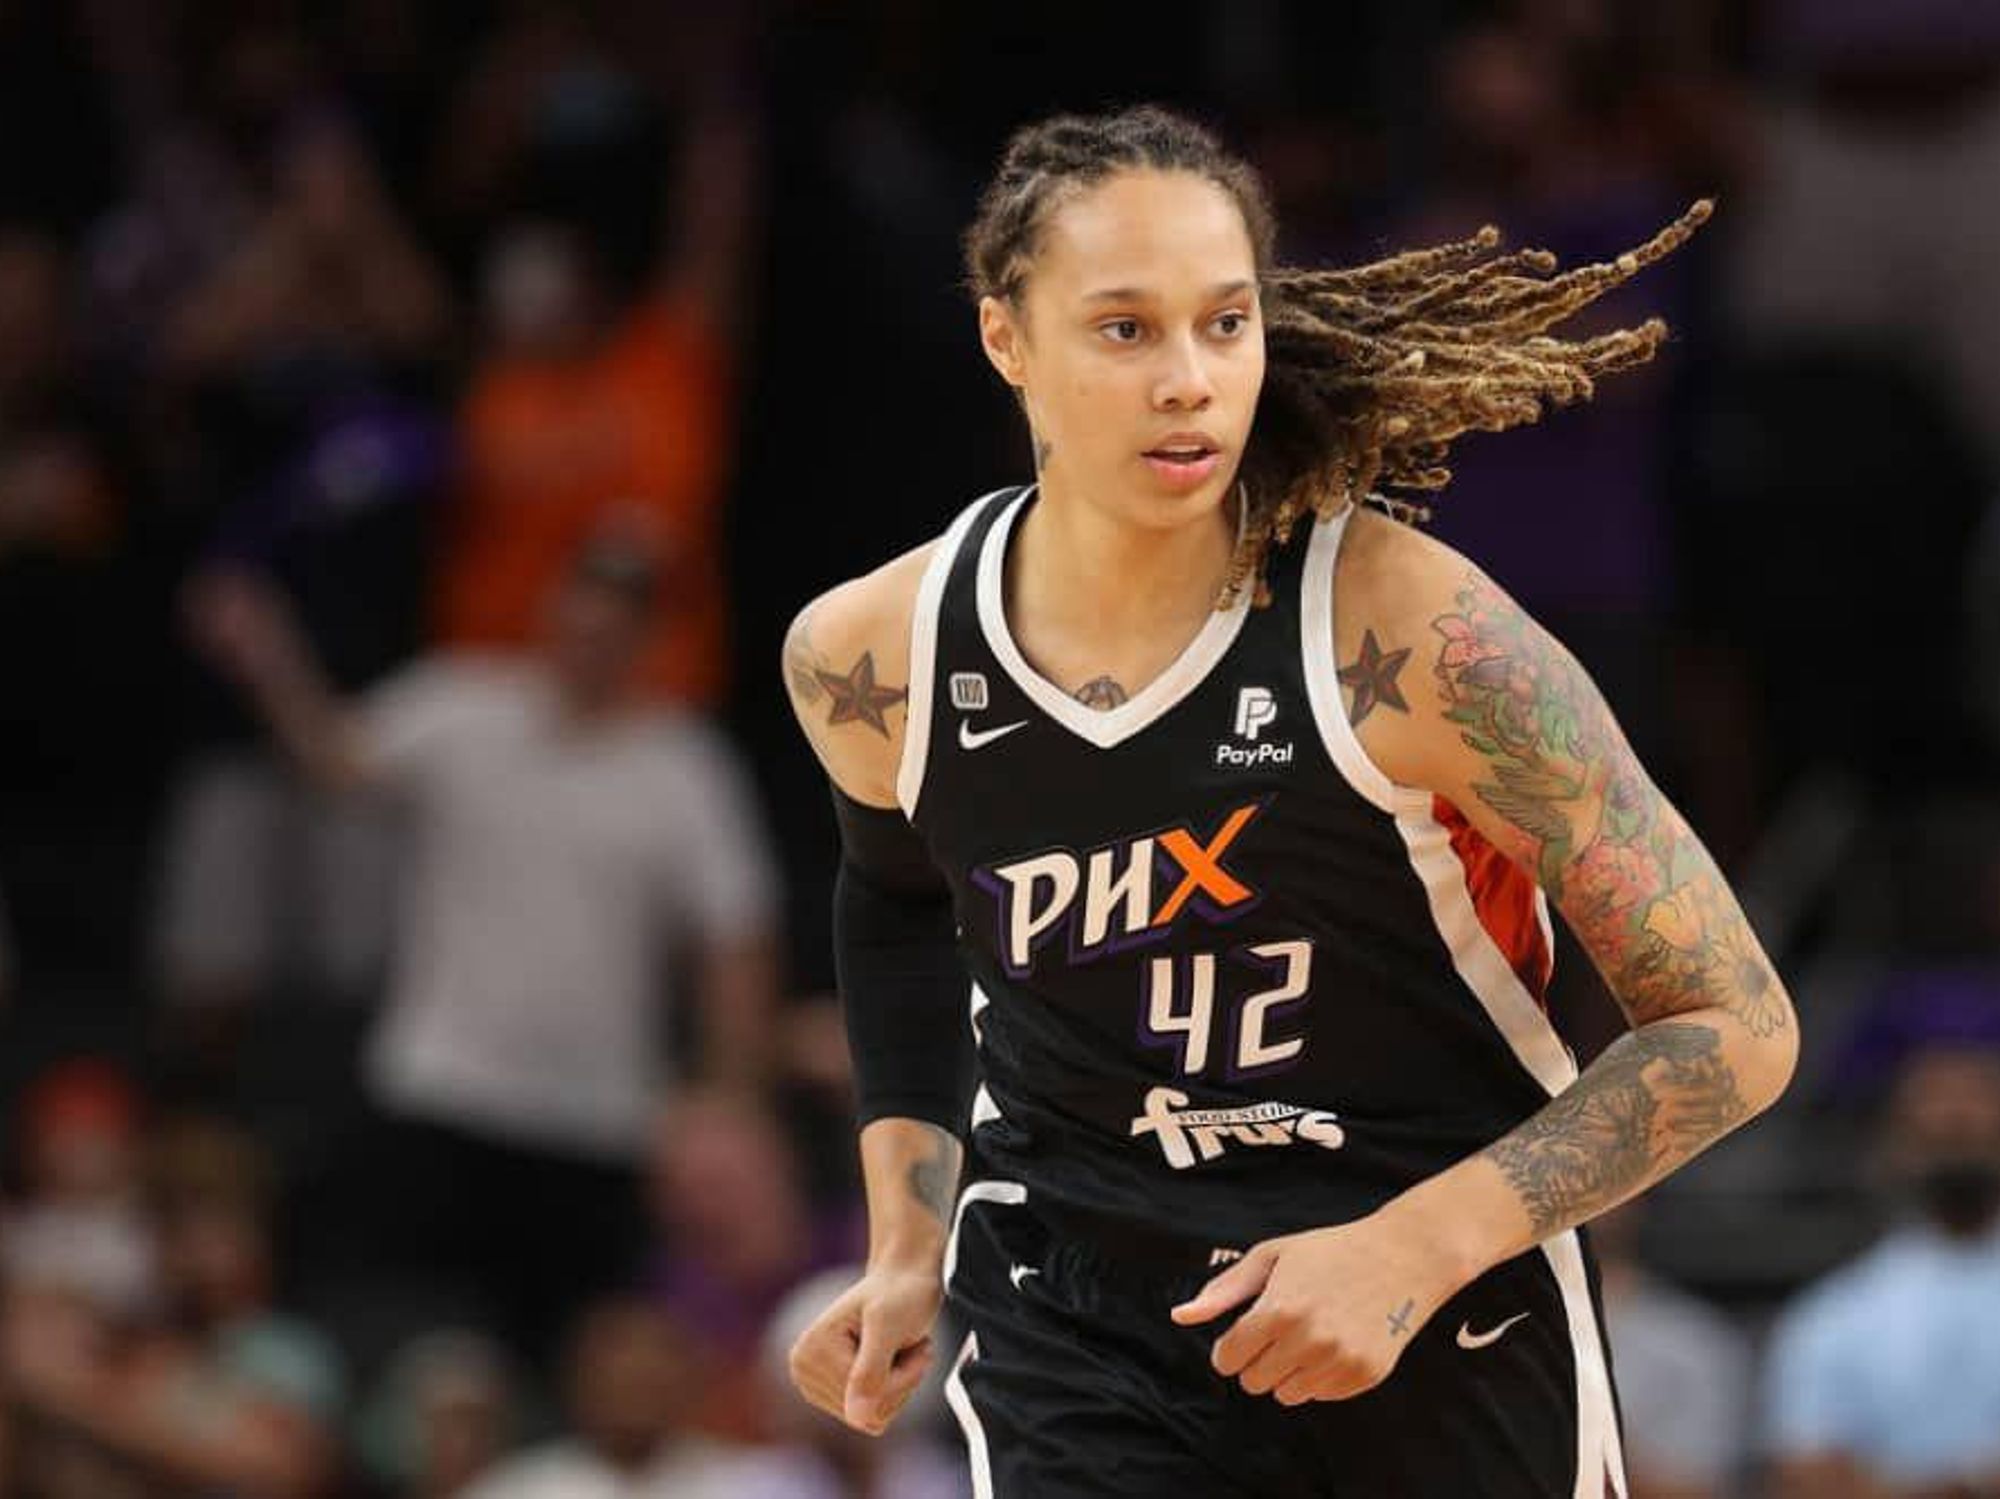 Texas-born basketball star Brittney Griner freed in high-stakes U.S.-Russia prisoner exchange